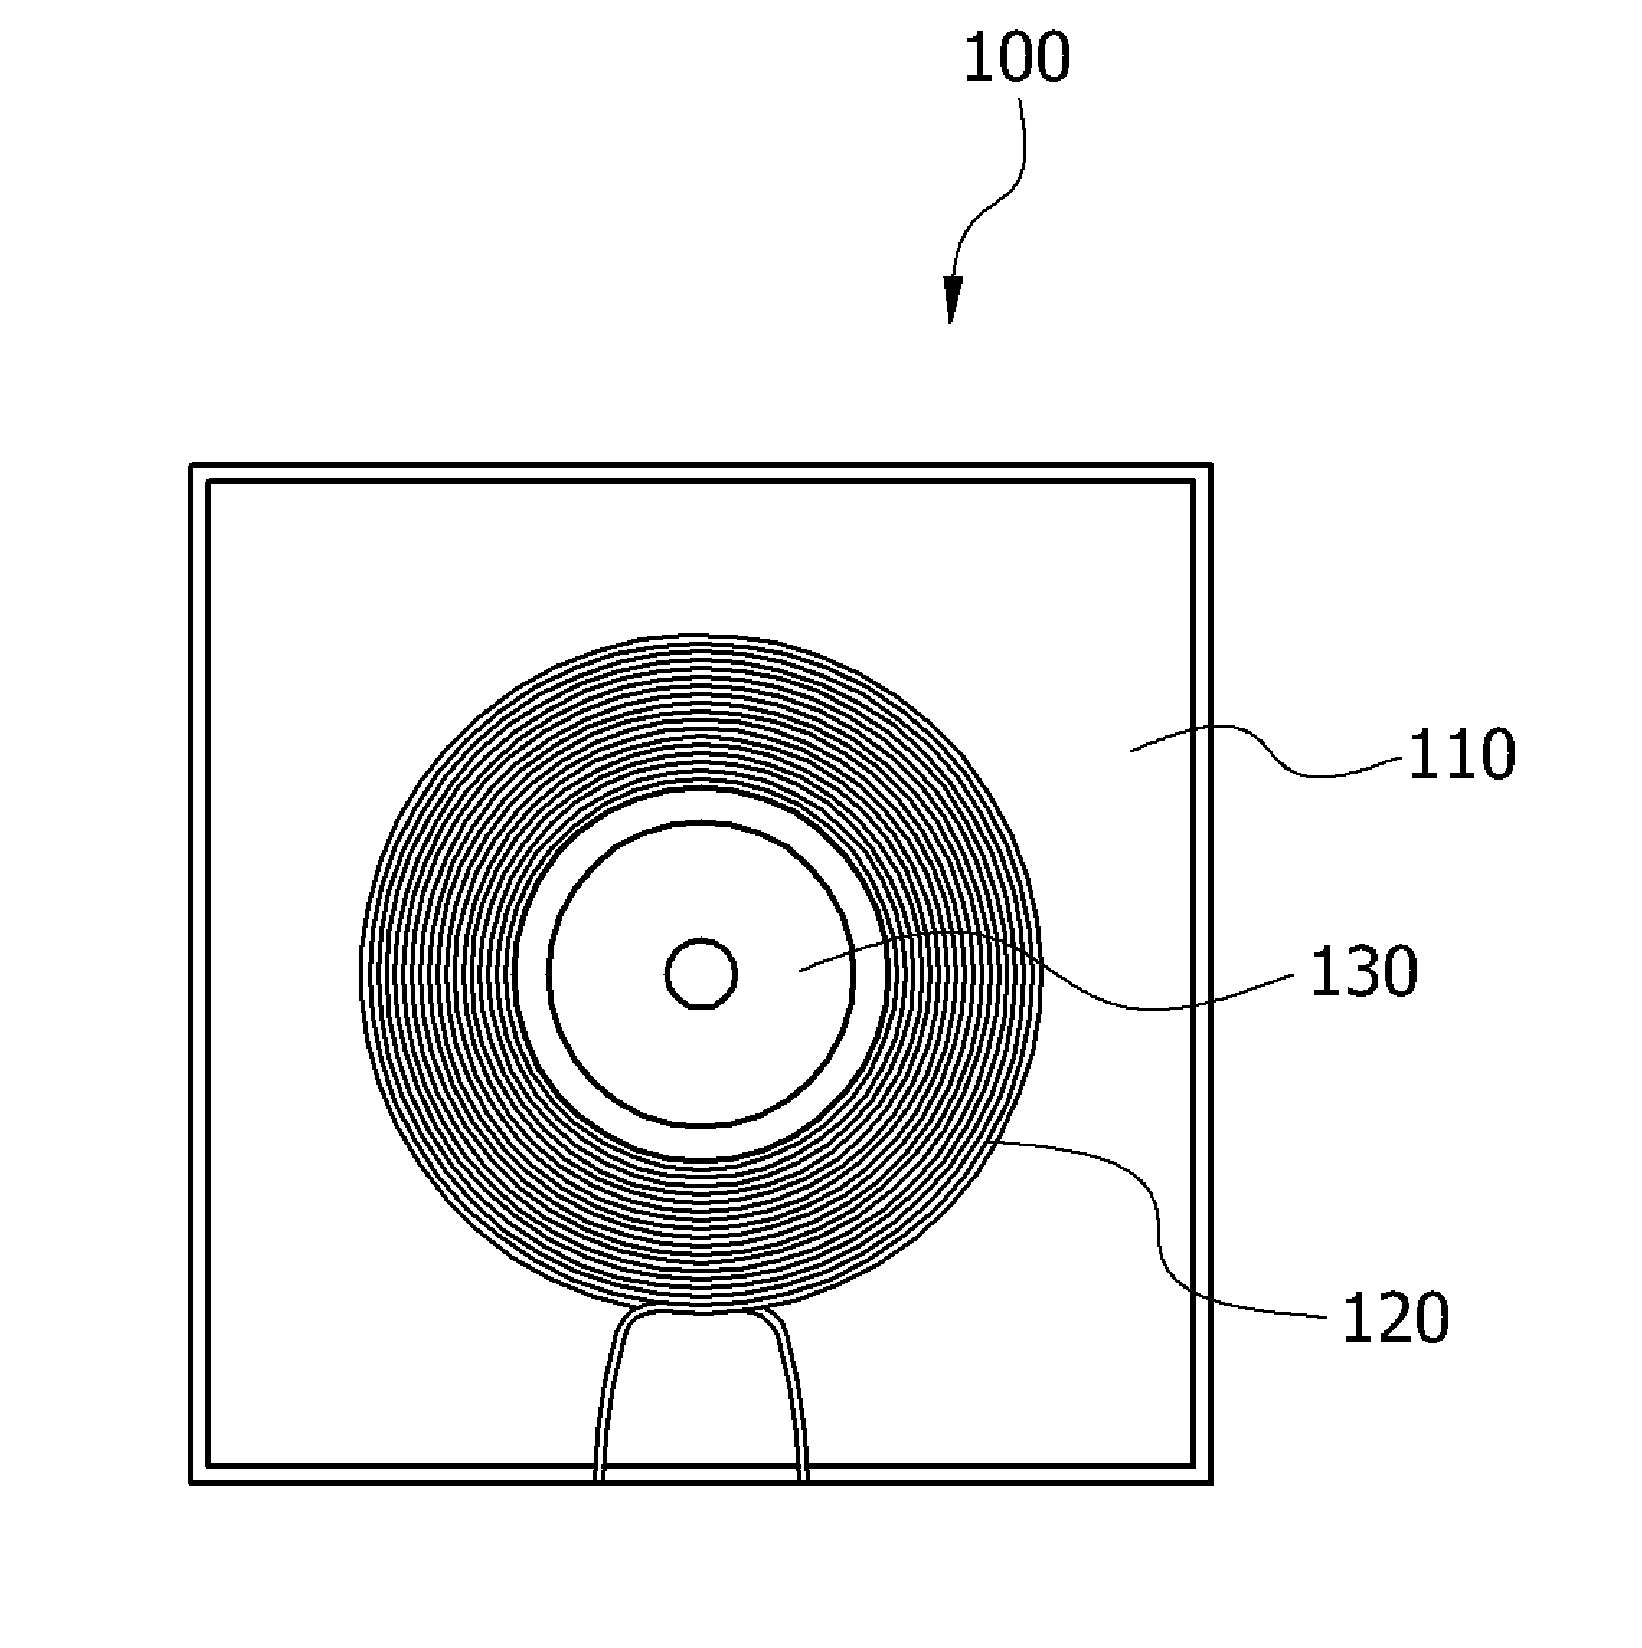 Receiving antenna and wireless power receiving device including the same